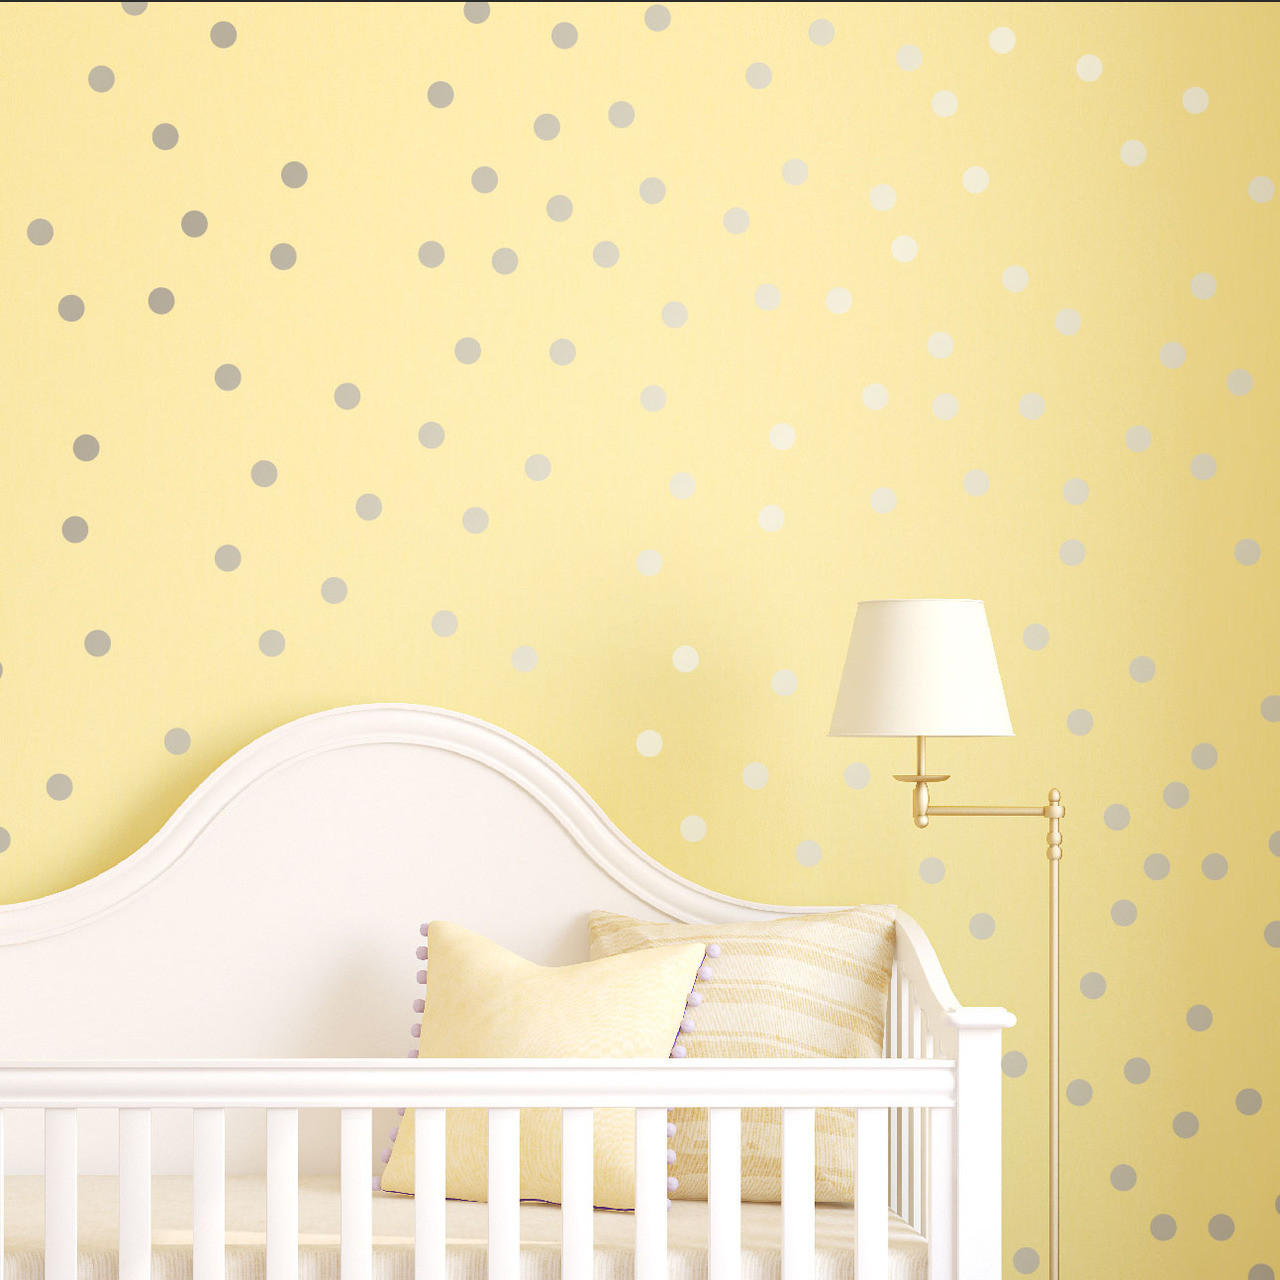 2 Inch - 100 Dots, Rose Gold Innovative Stencils Polka Dot Wall Decal Nursery Kids Room Peel and Stick Removable Sticker Circle Pattern Decor #1326